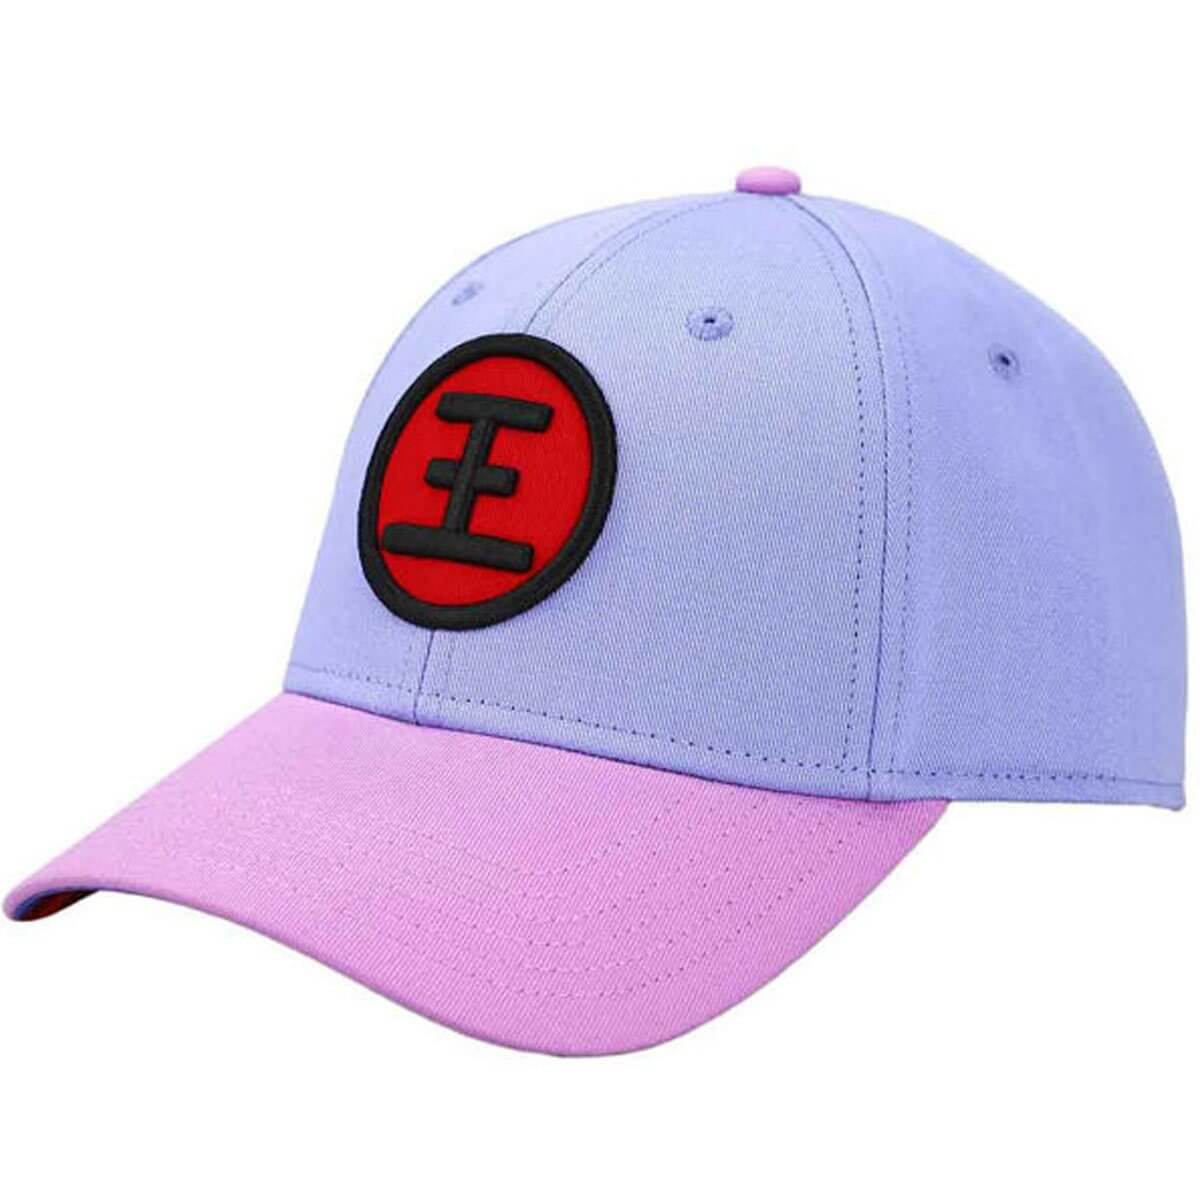 Purple hat with Koenma's symbol on the hat with red and black embroidery.